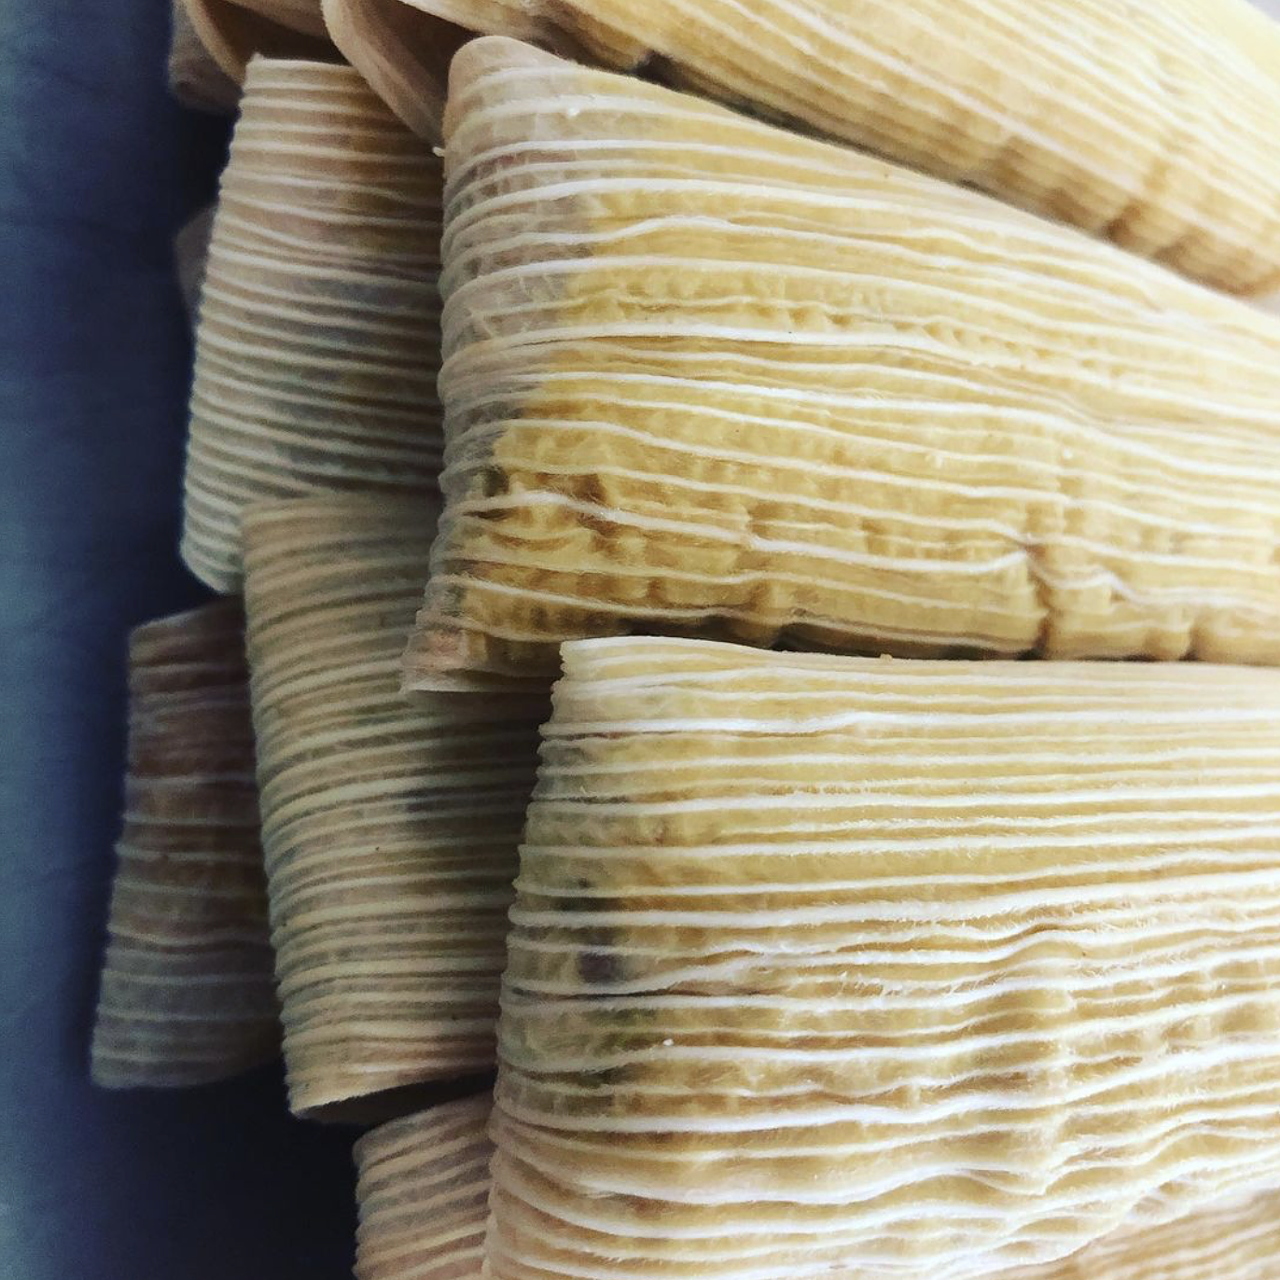 Stock up on holiday tamales
There's no culinary delight that captures SA holiday tradition like tamales. Purchase a dozen (or two or three) to bring to a holiday party — if you can bring yourself to share.
Photo via Instagram / lalasgorditas